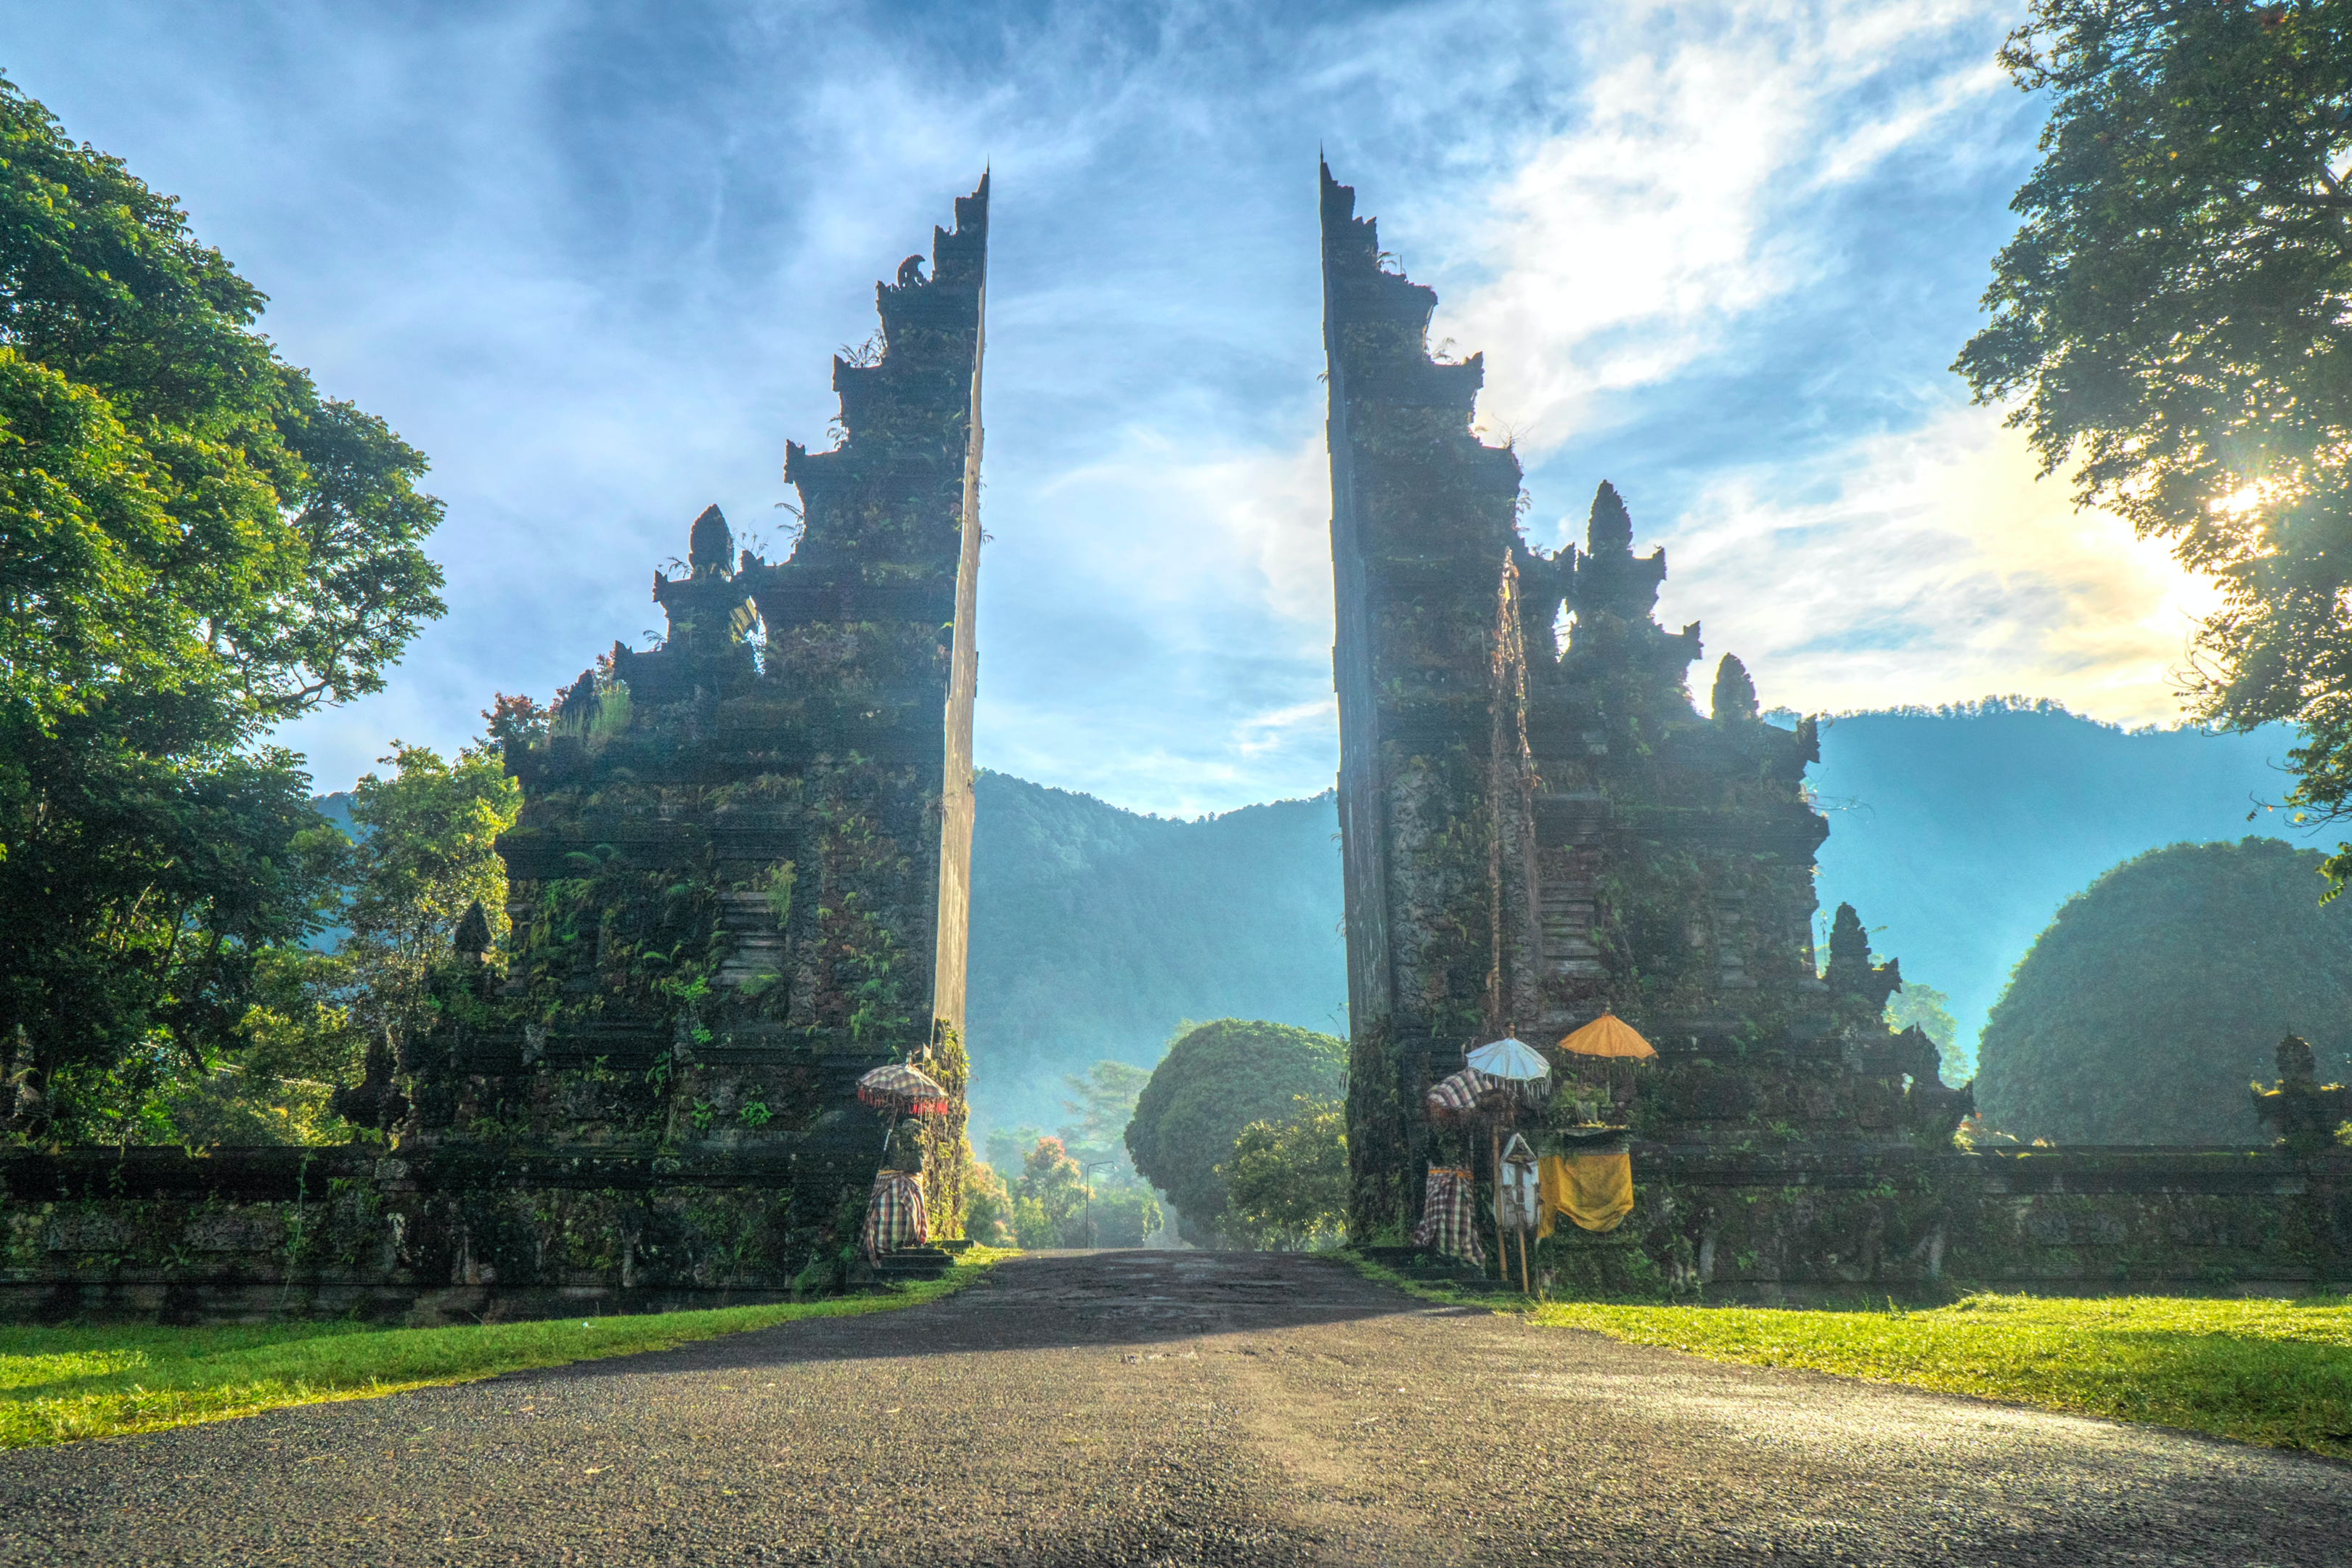 The Handara Gate is a popular photo spot in Bali, Indonesia | Photo by Alexandr Podvalny from Pexels